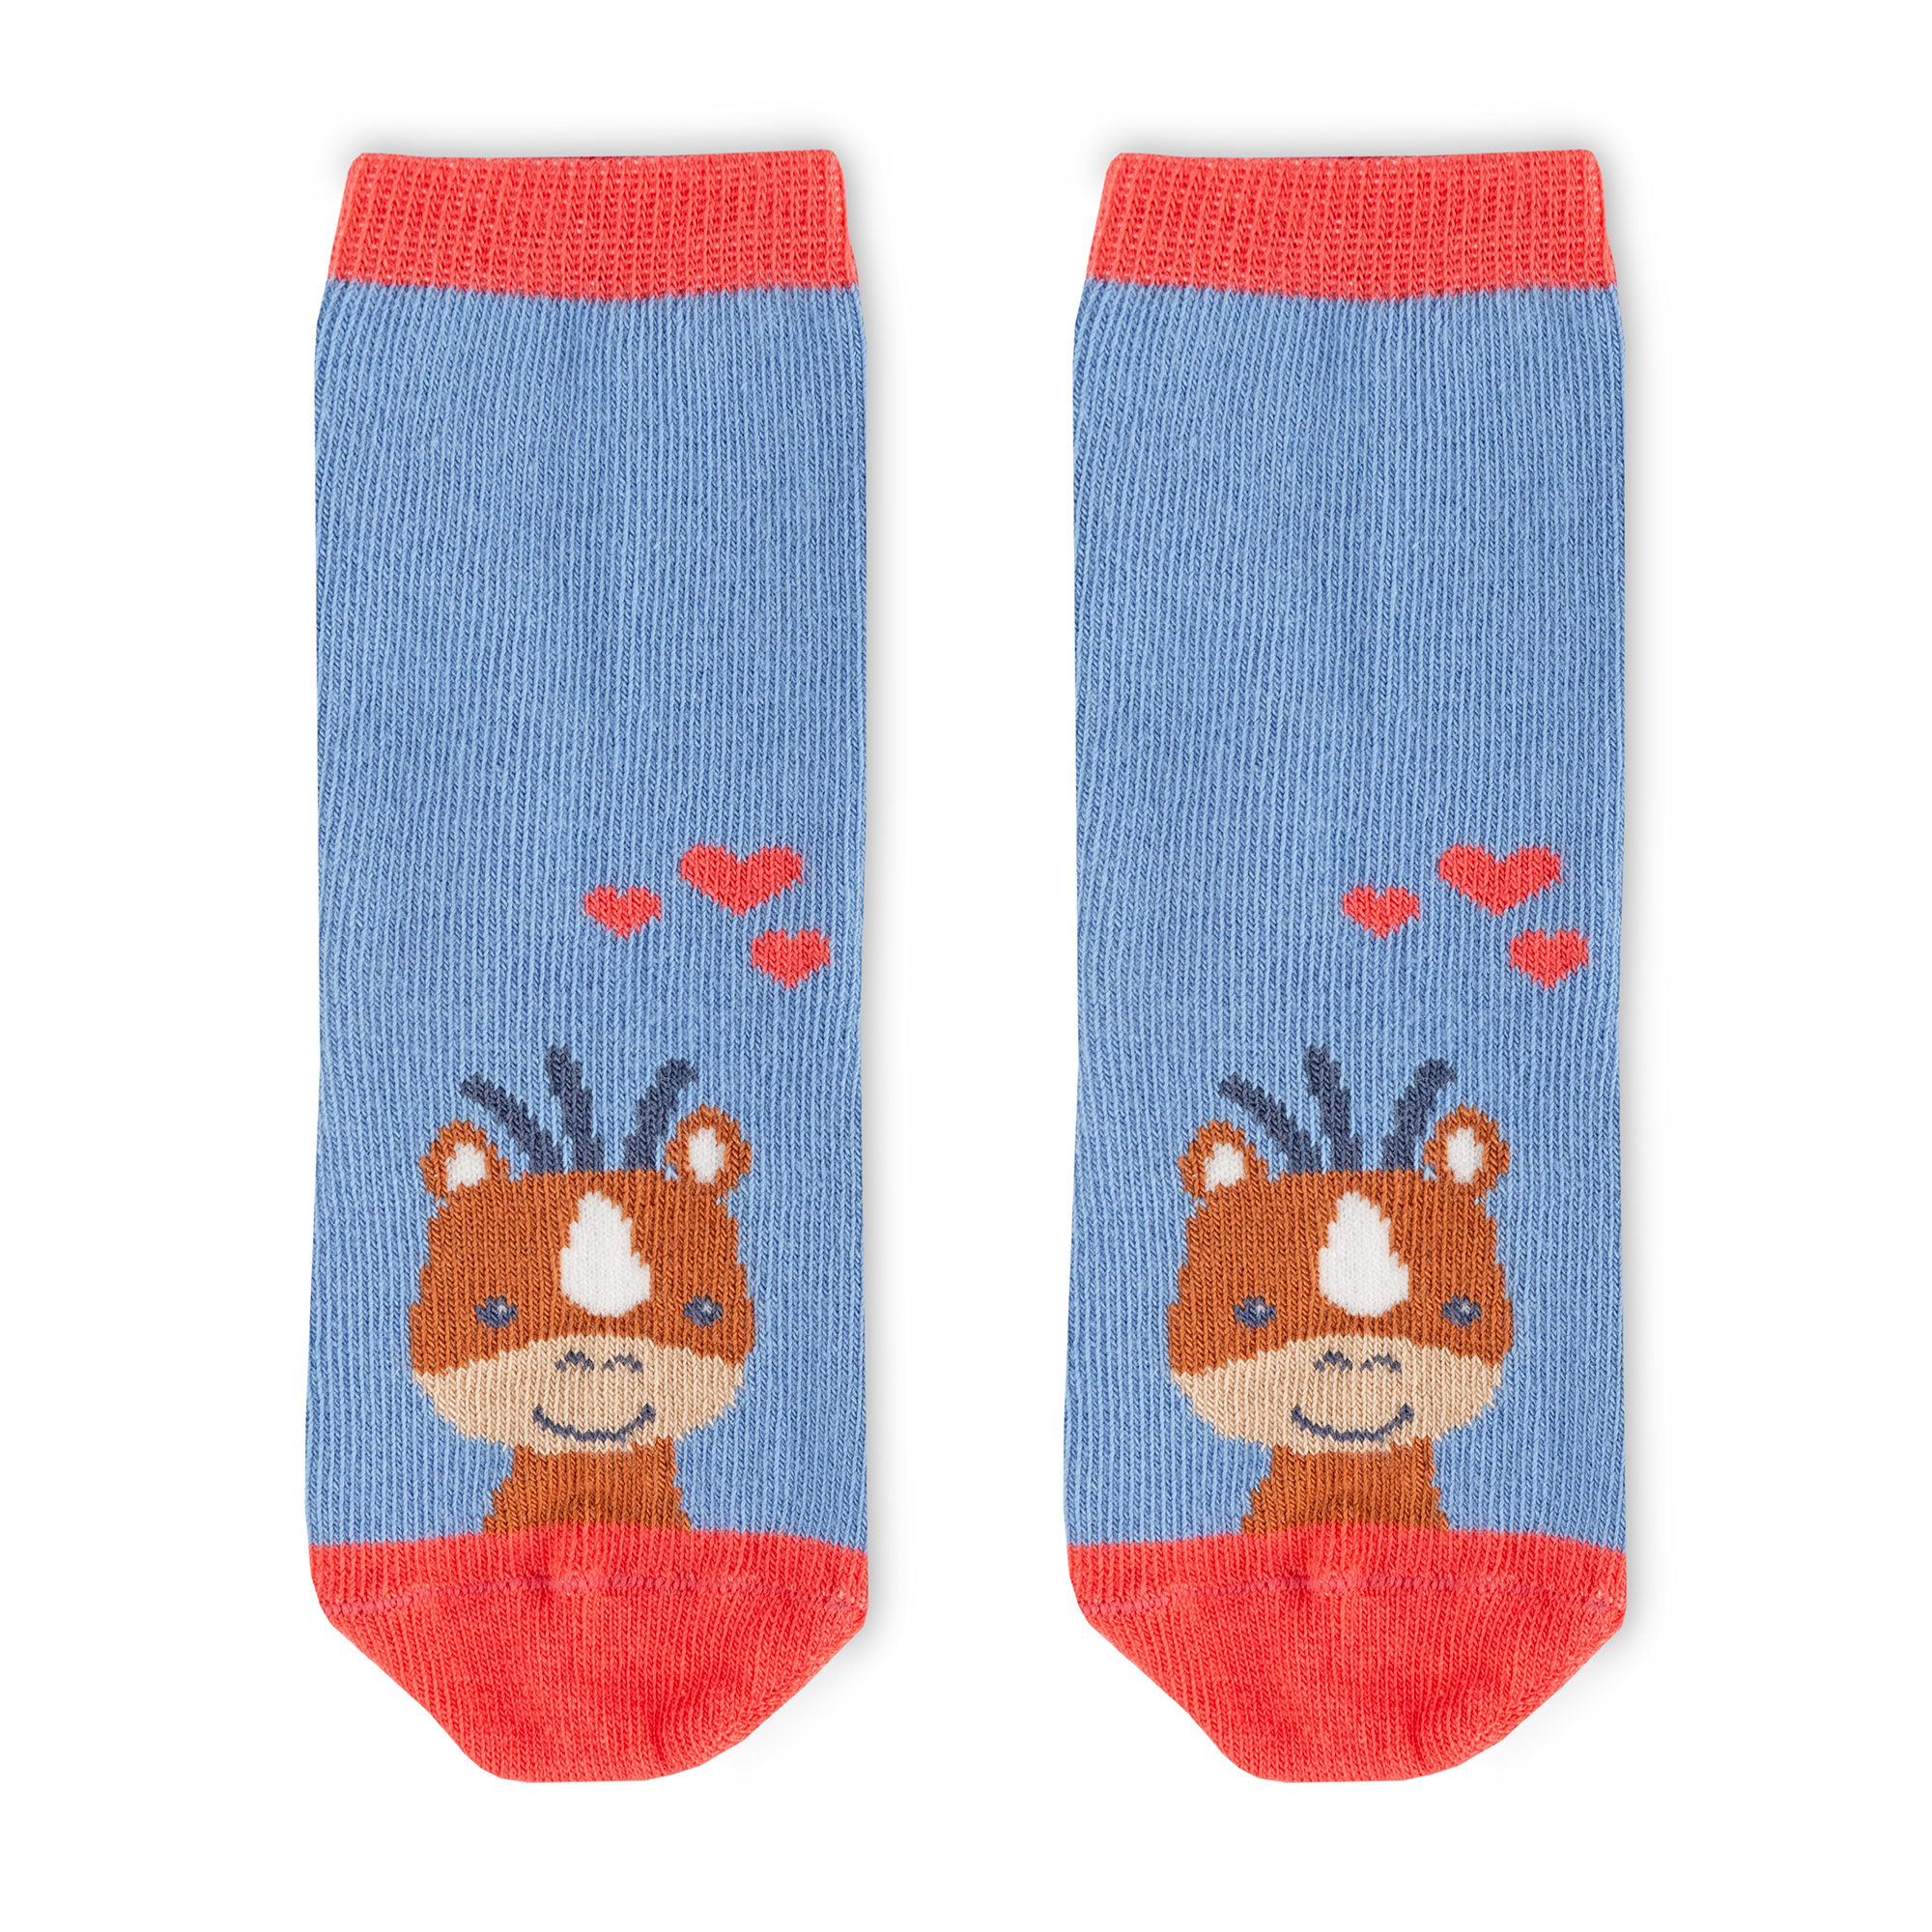 Set of 3 pairs children's socks, Funny Horse collection